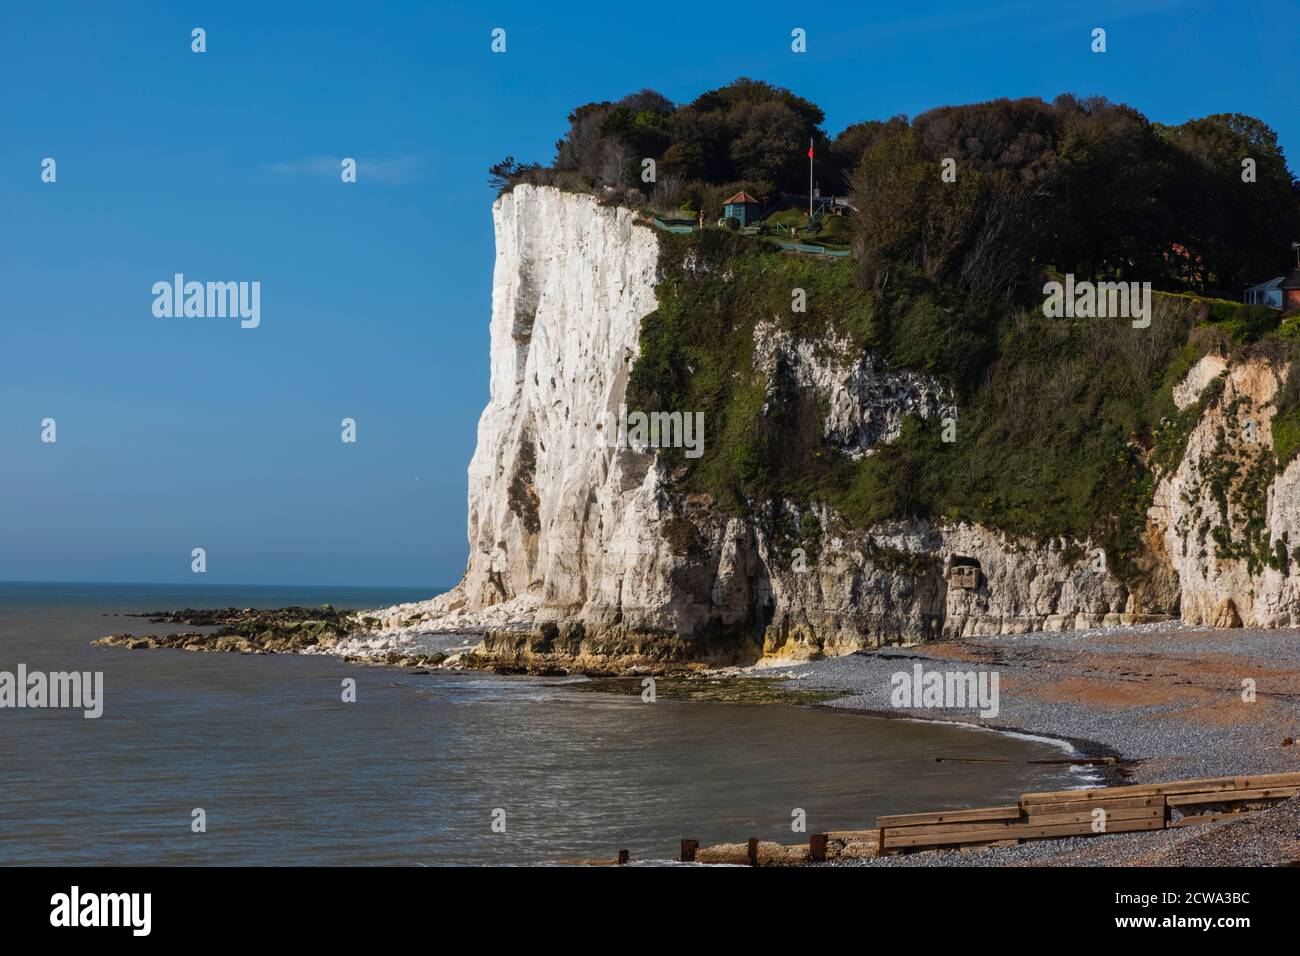 England, Kent, Dover, St. Margaret's Bay, The Beach und The White Cliffs of Dover Stockfoto